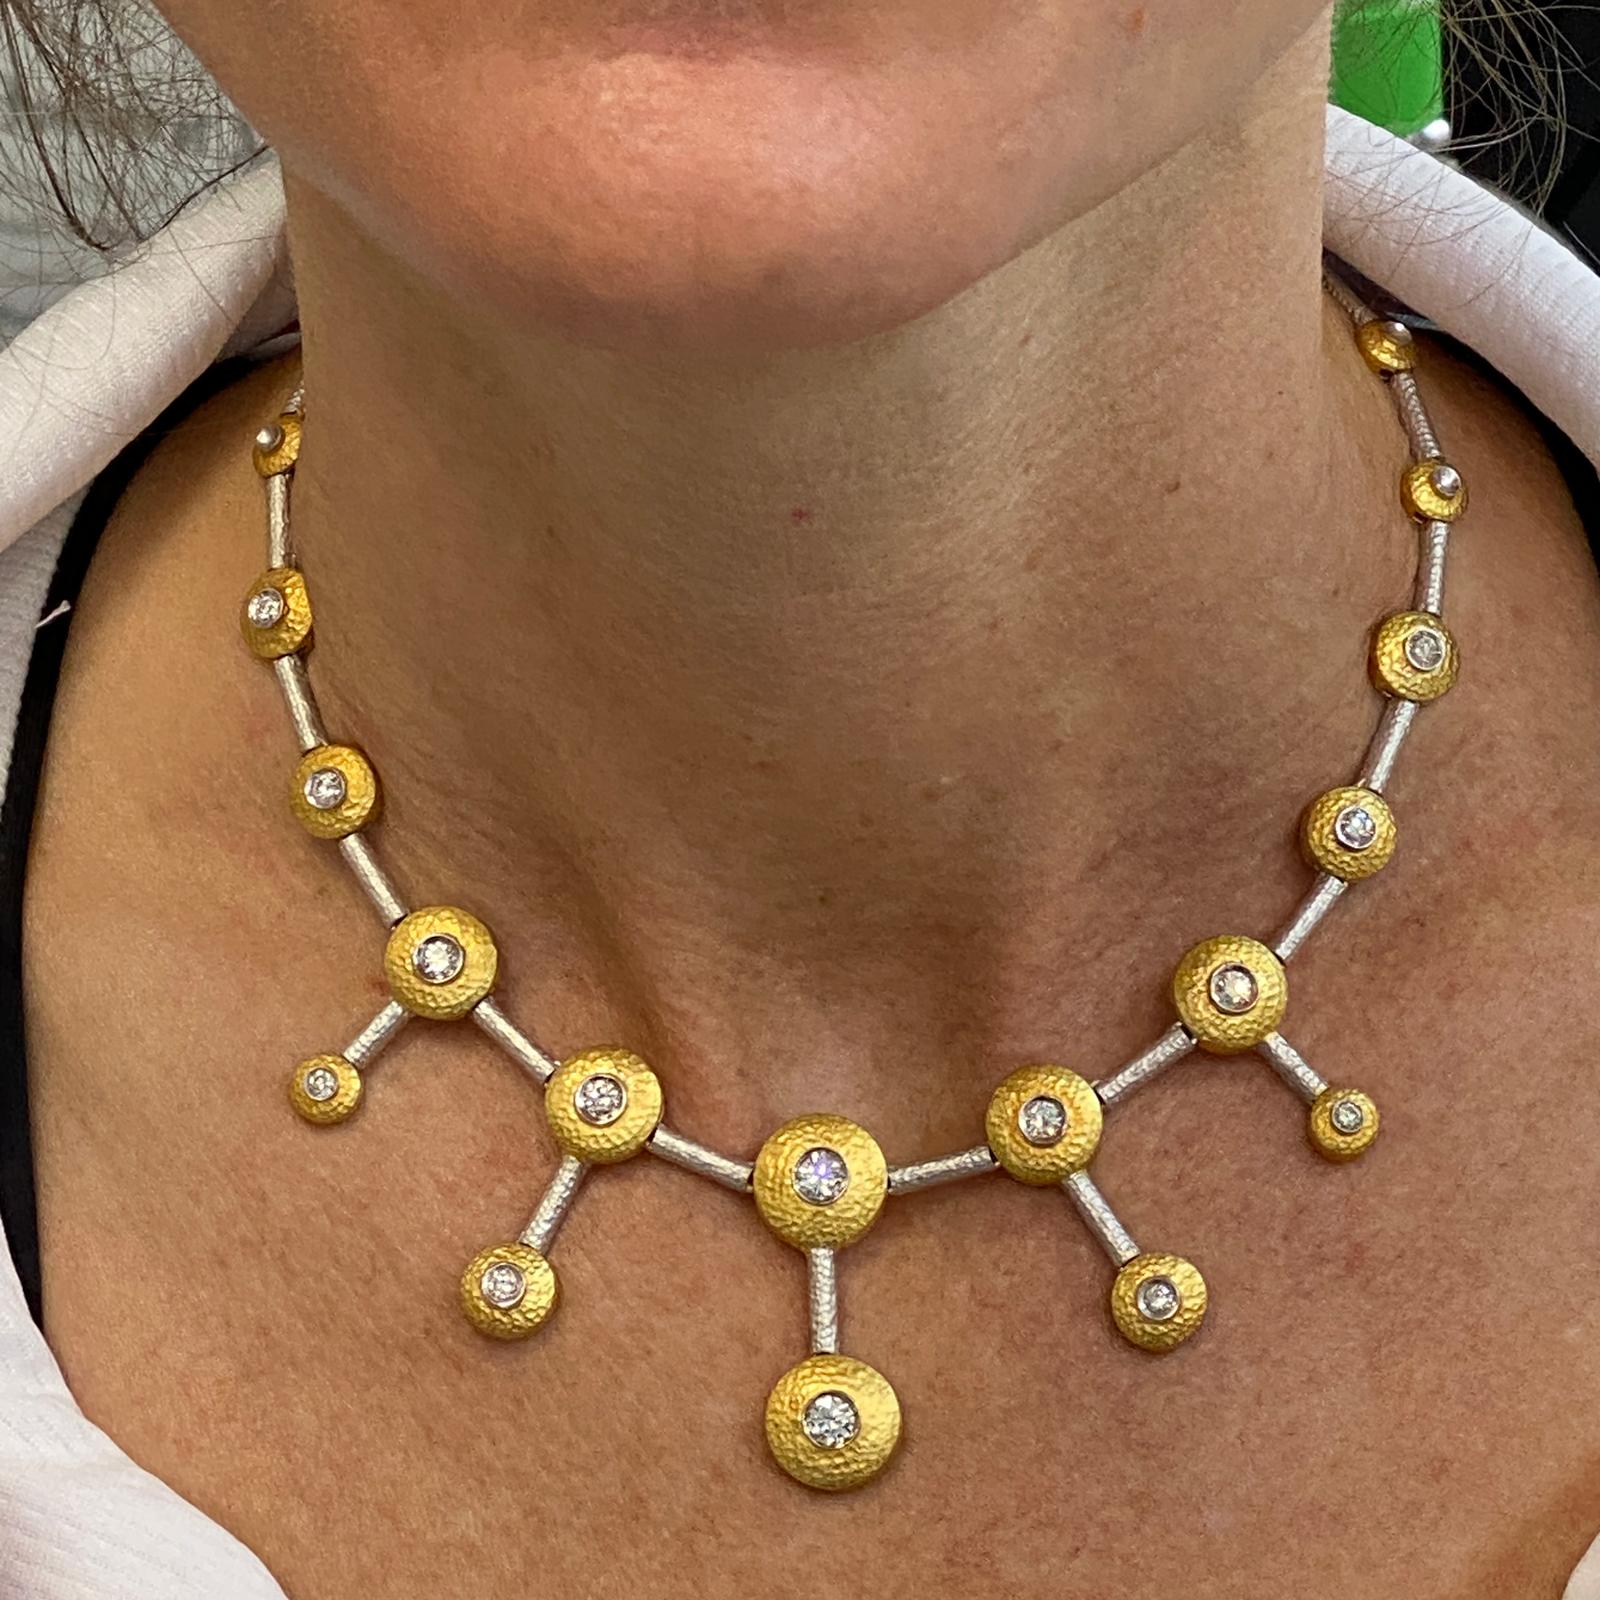 Fabulous diamond drop necklace fashioned in hammered 18 karat yellow and white gold. The necklace features 14 round brilliant cut diamonds weighing approximately 2.25 carat total weight and graded G-H color and VS clarity. The necklace measures 14